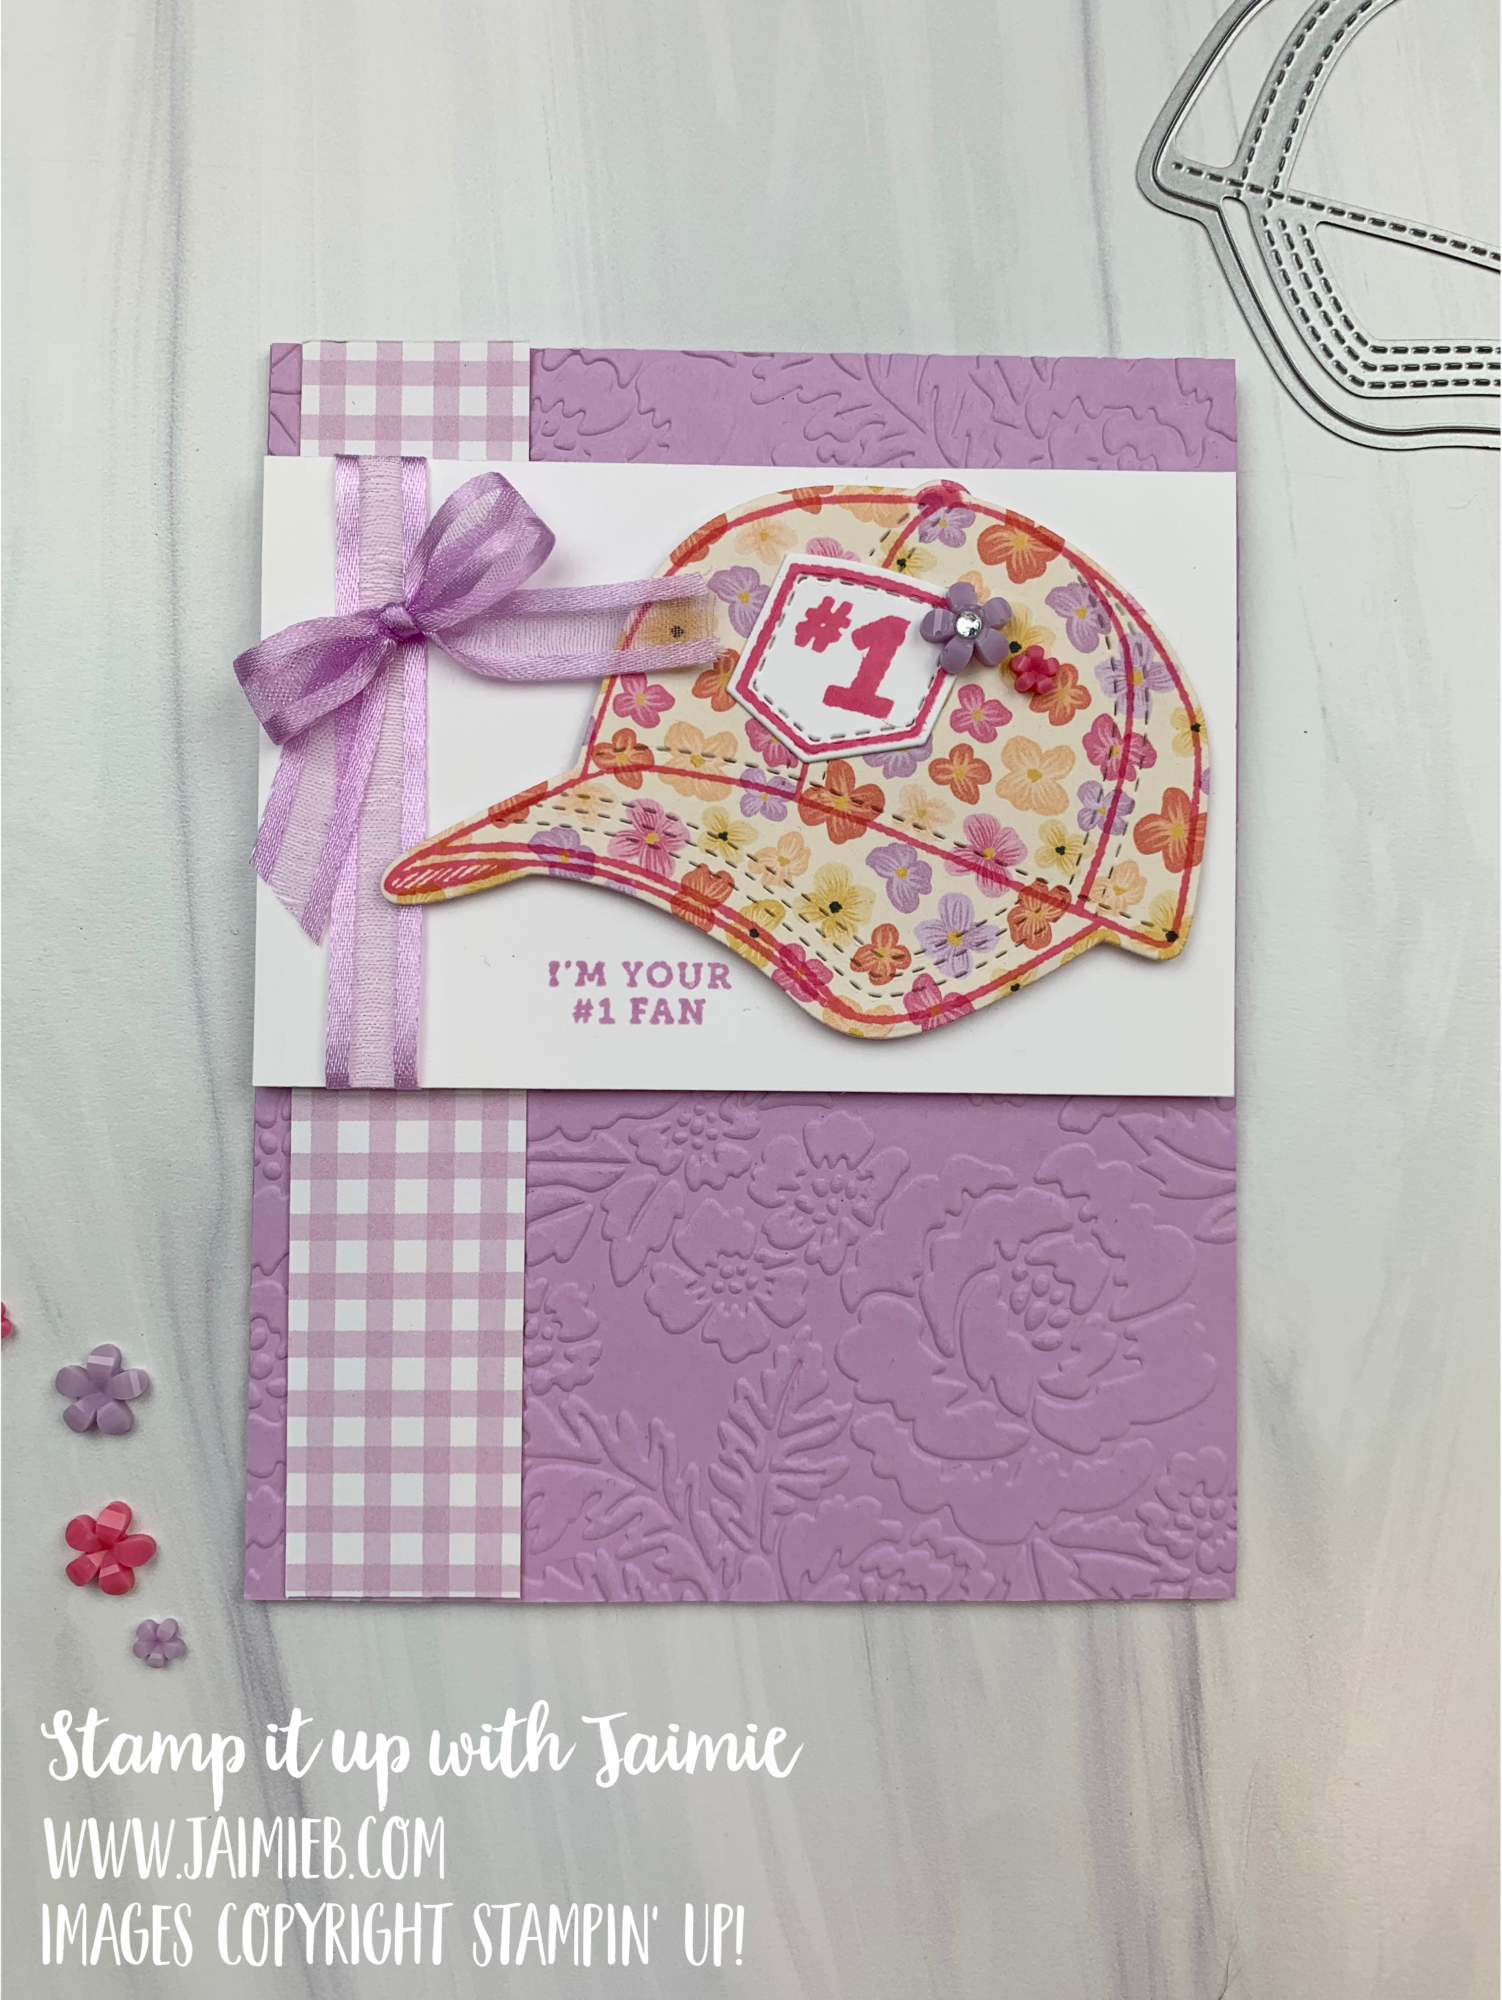 Stampin’ Up! Hats Off Cards